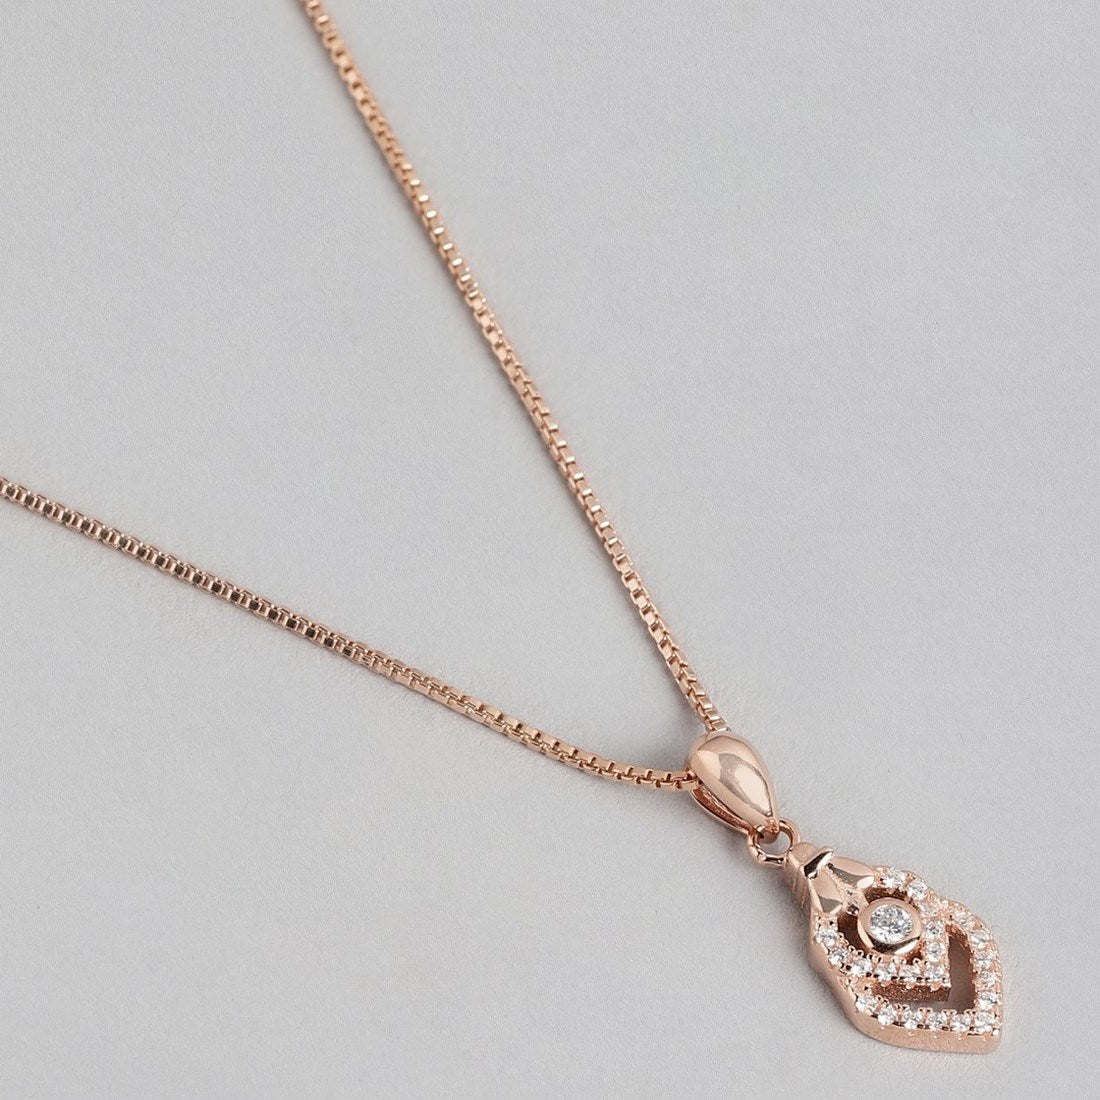 Hearty Elegance Radiant Rose Gold-Plated 925 Sterling Silver Pendant with Chain